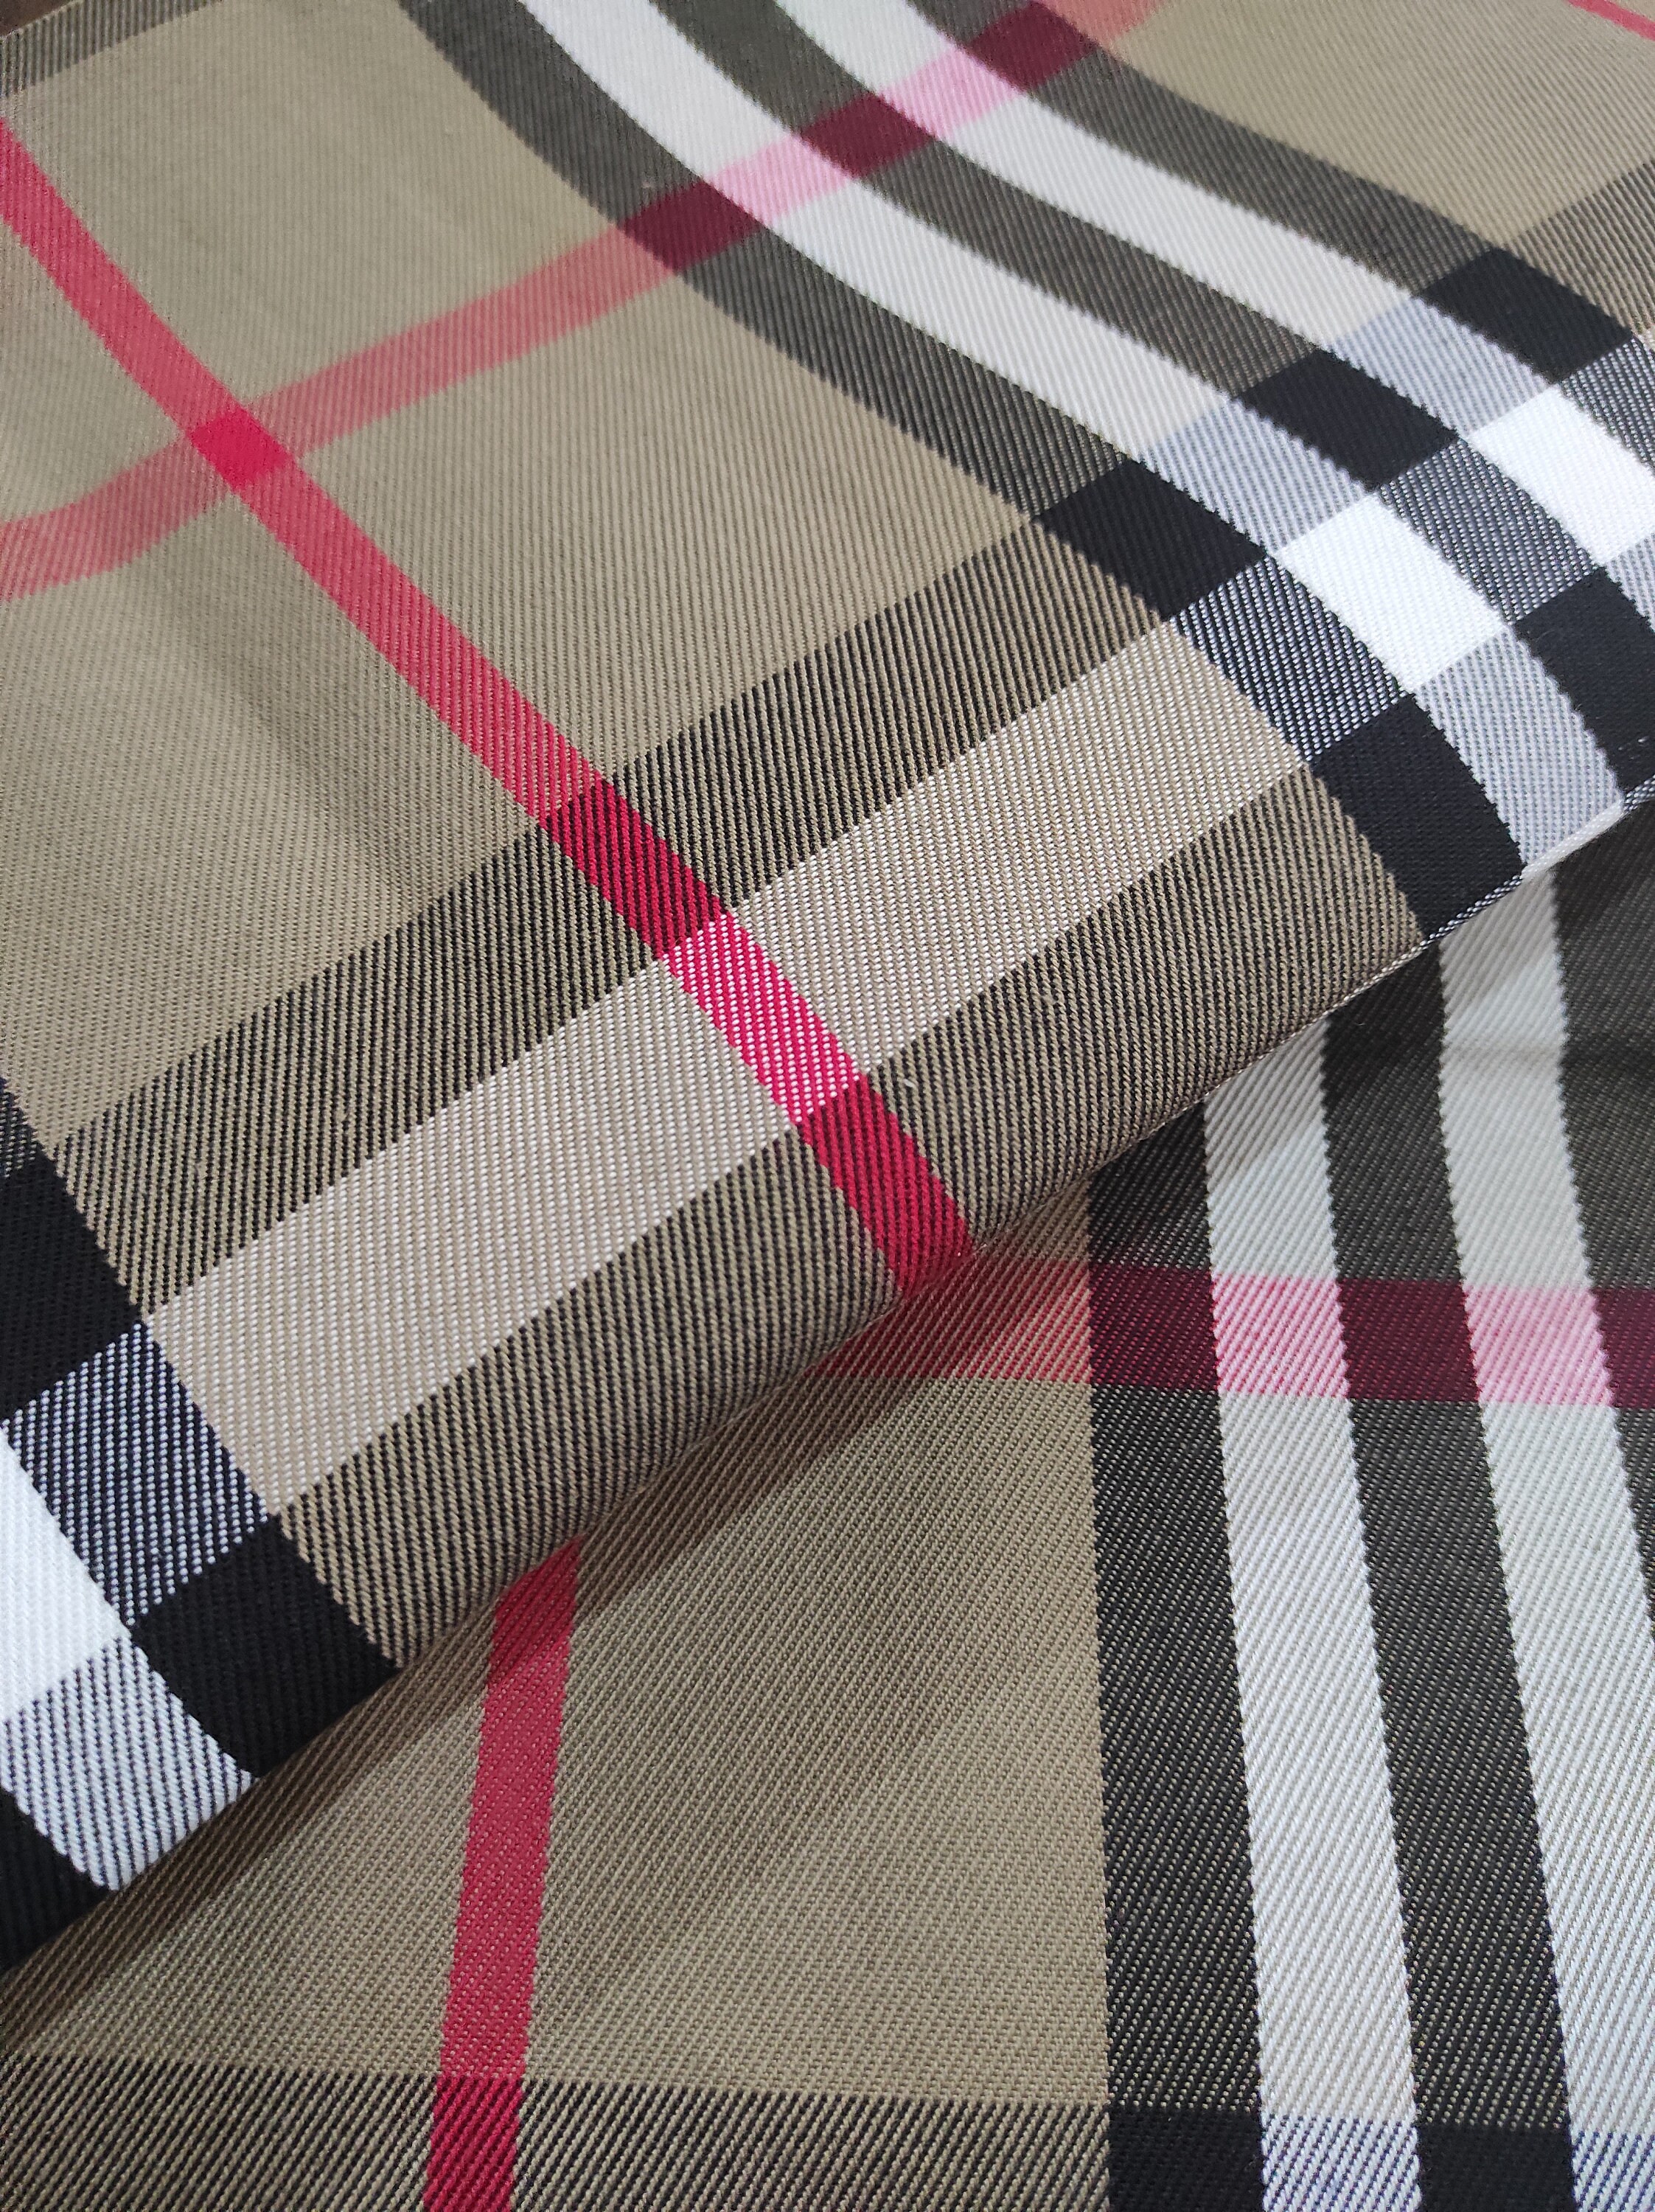 Burberry Fabric by the Yard - Etsy